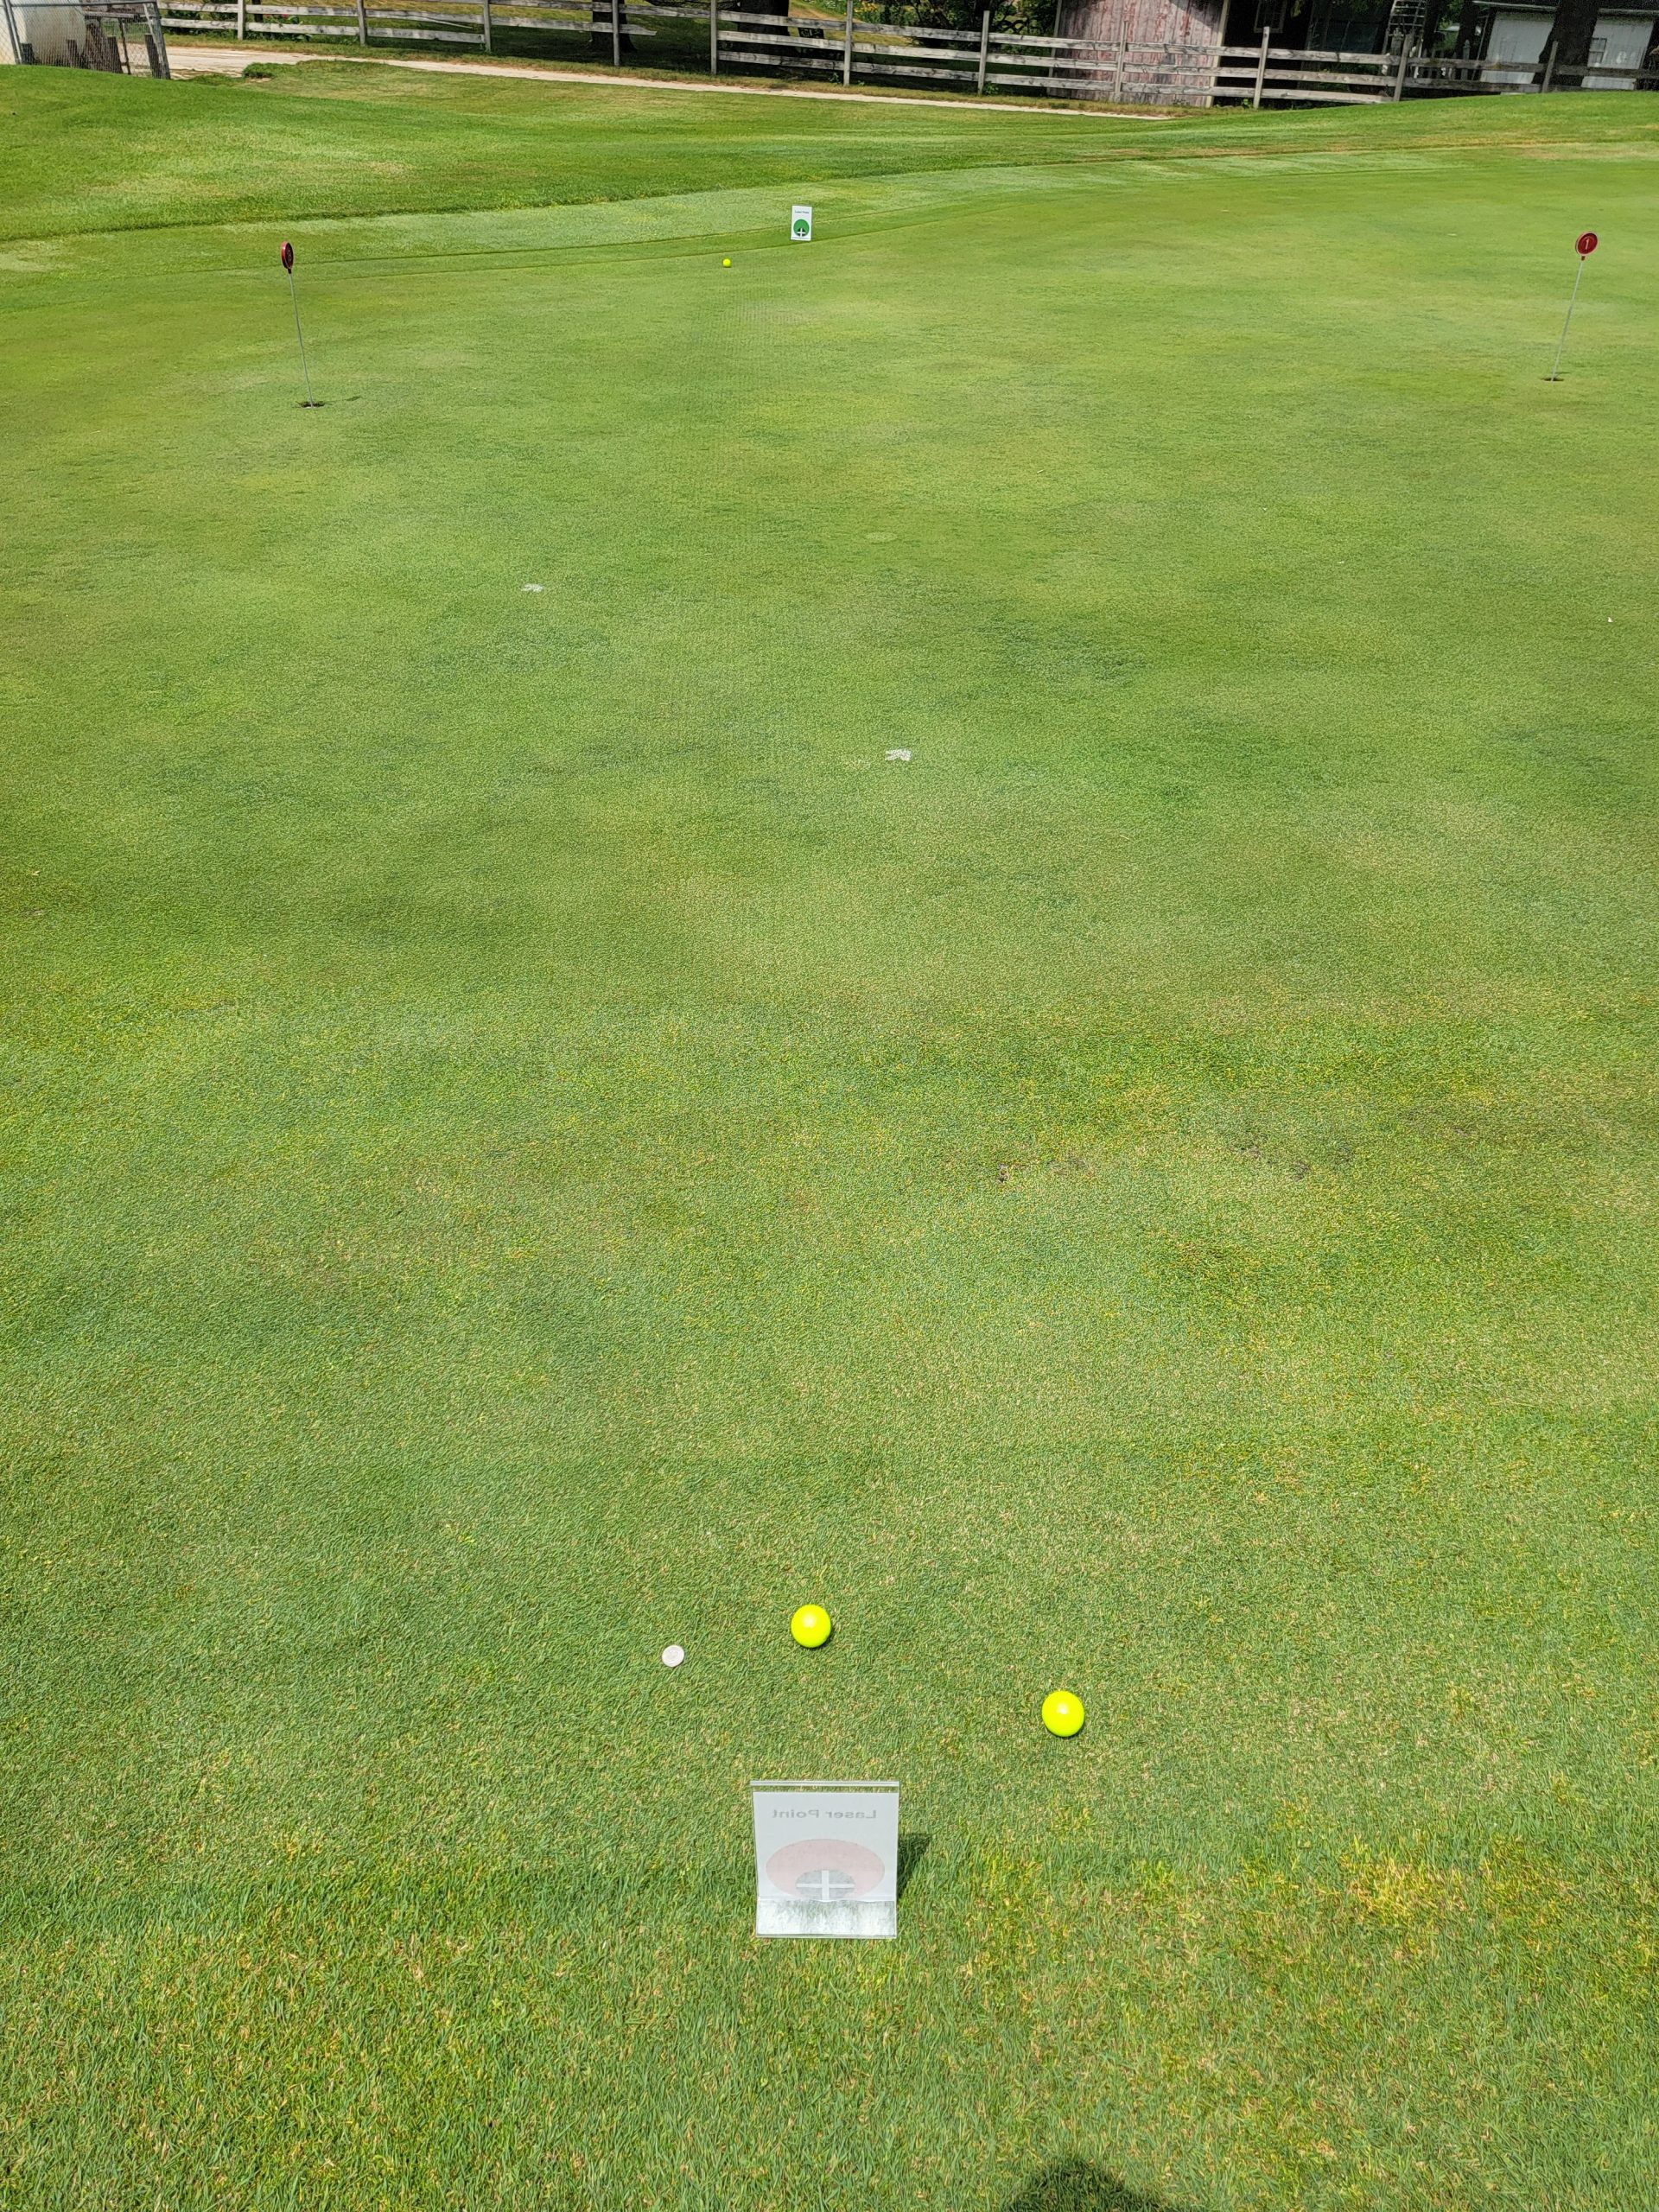 Old Duffer Golf image of a stimp roll for a putting two hour practice